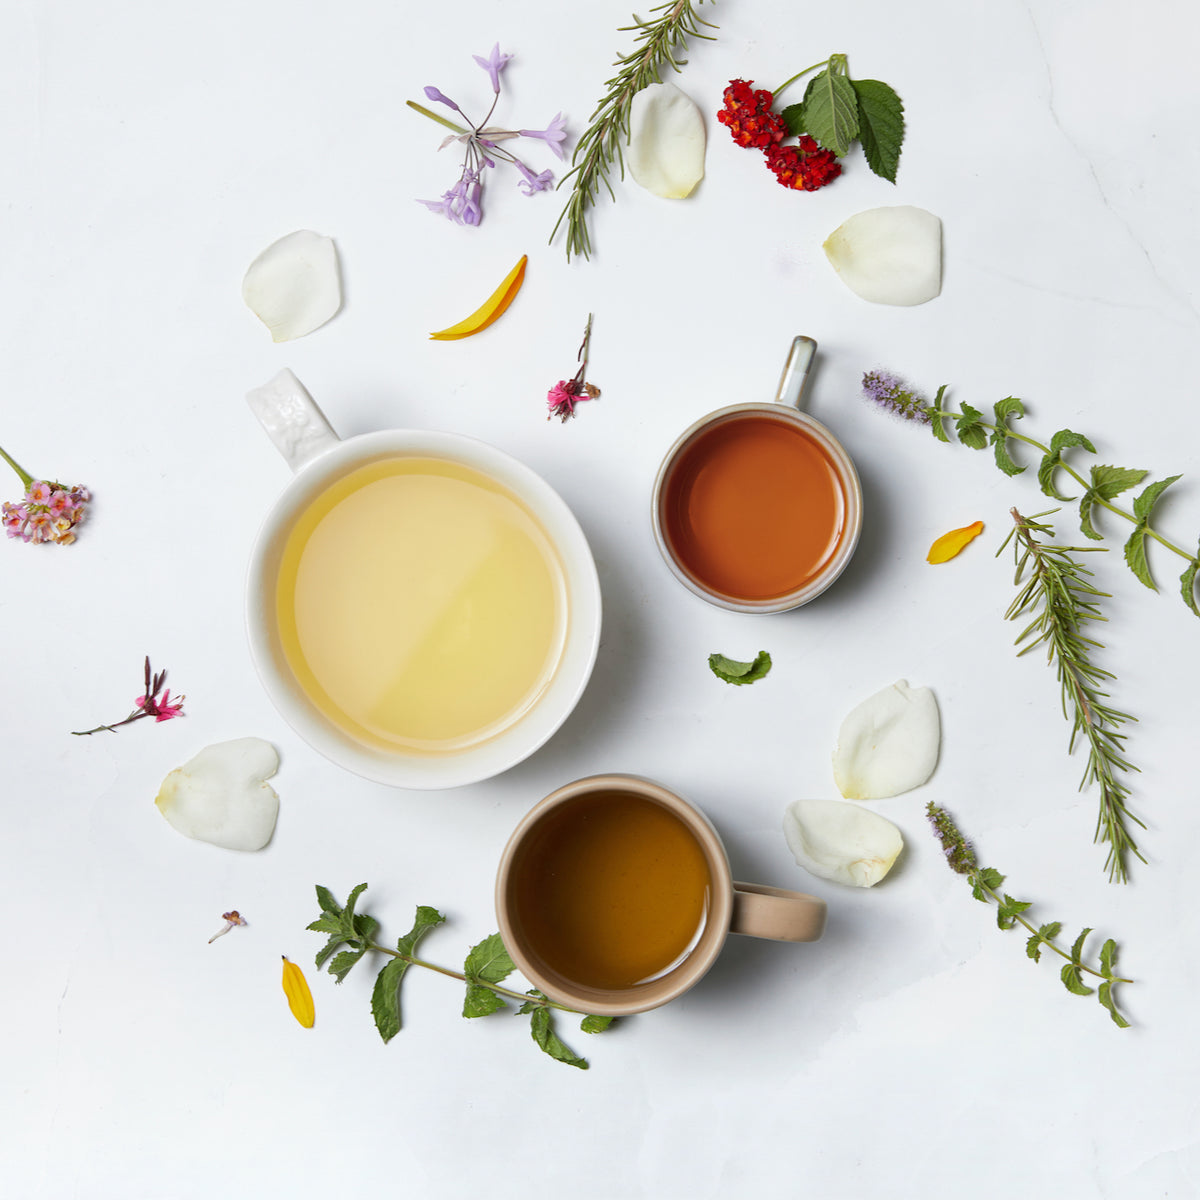 How To Brew Tea Perfectly Every Time - Life is Better with Tea